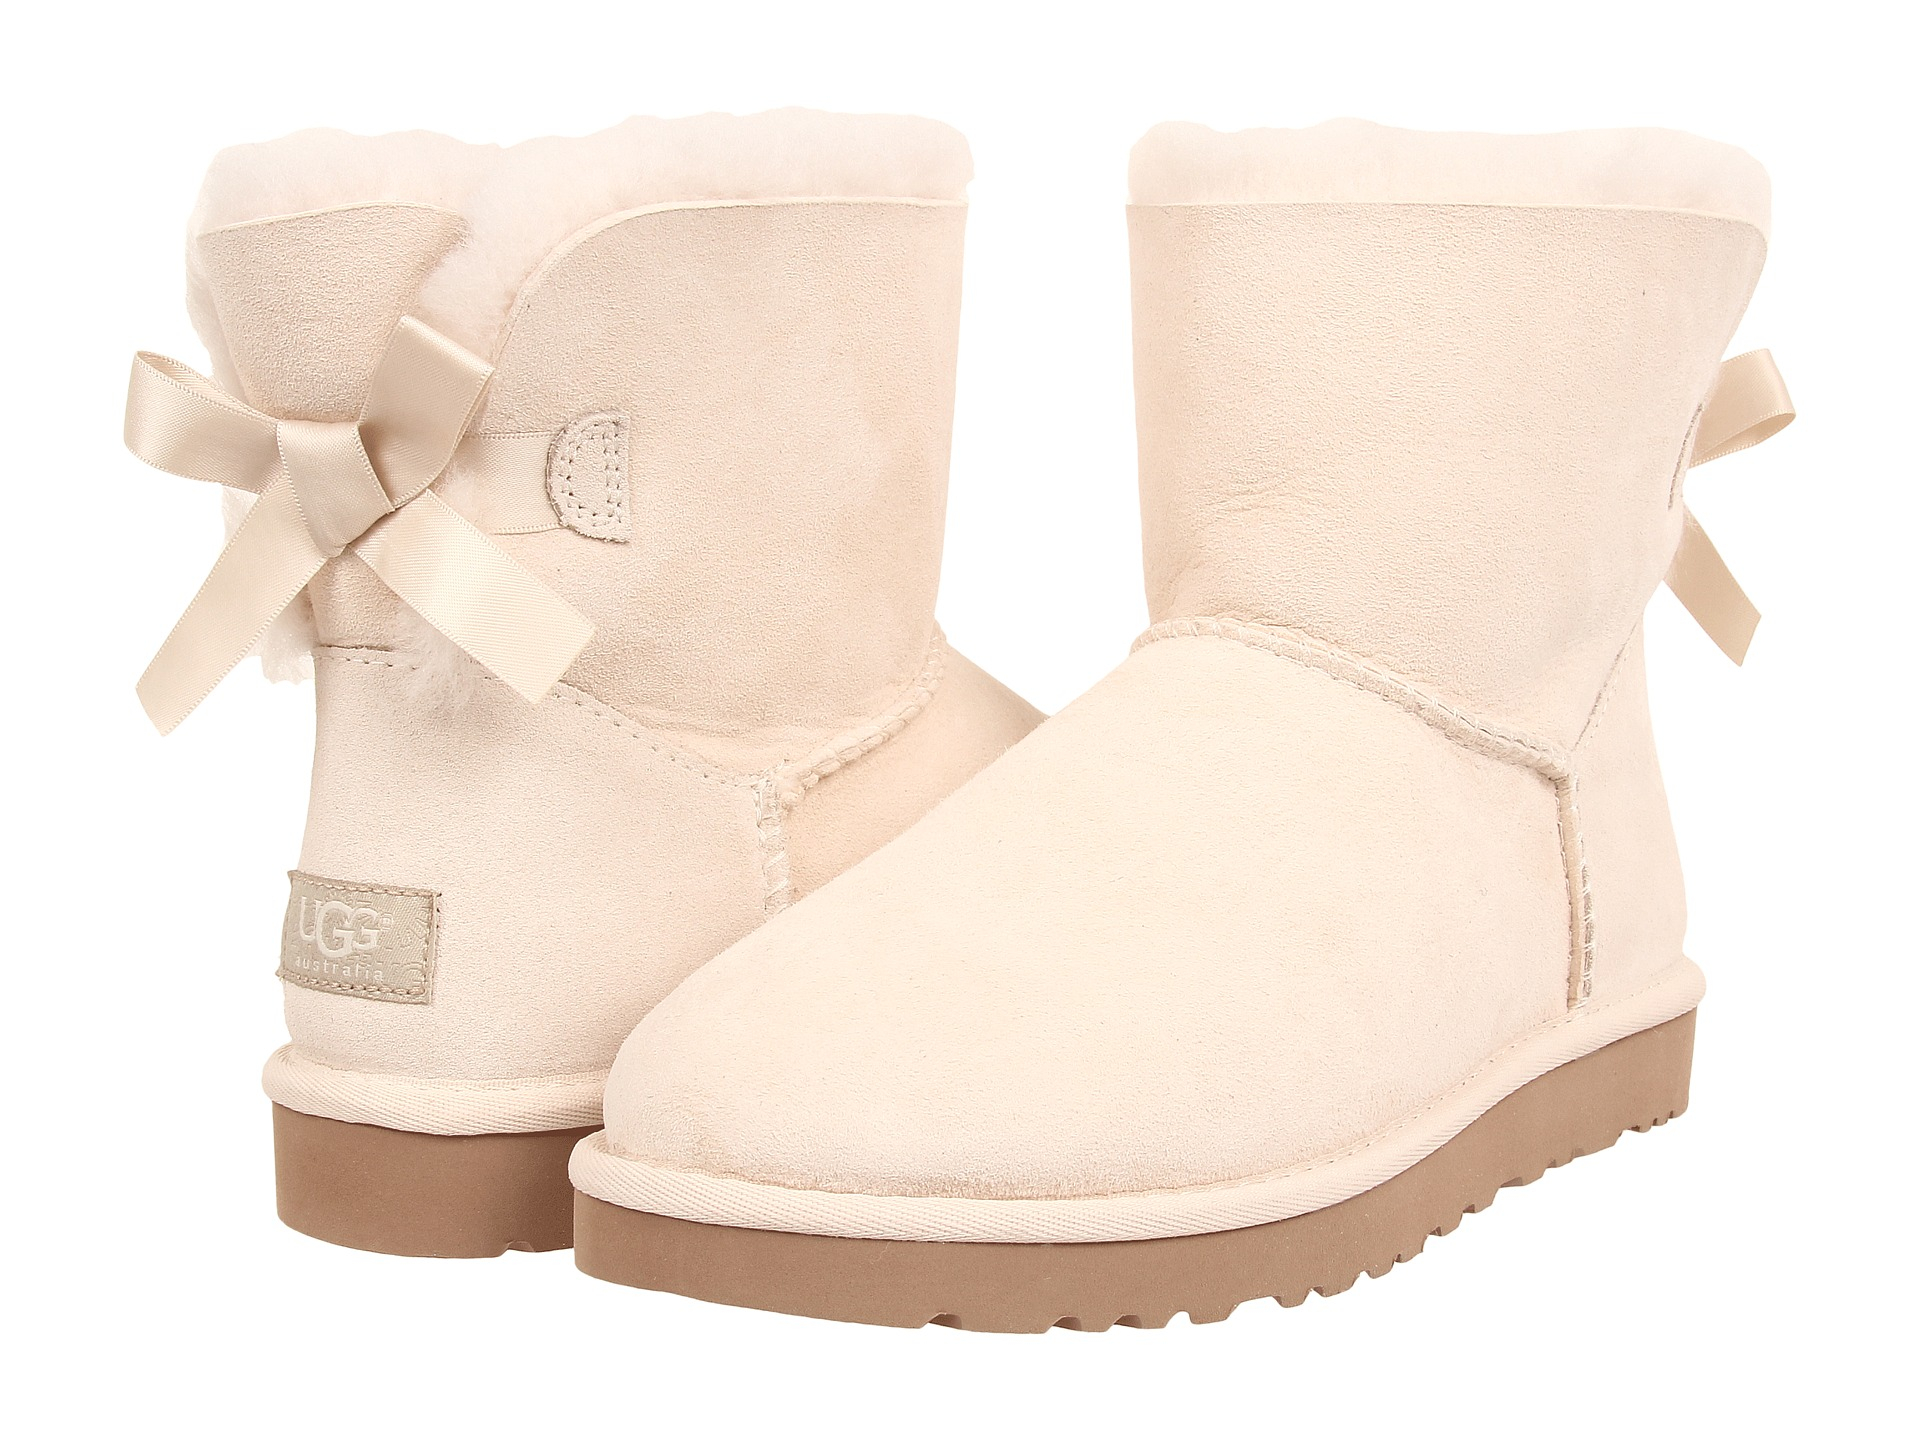 white ugg boots with bows